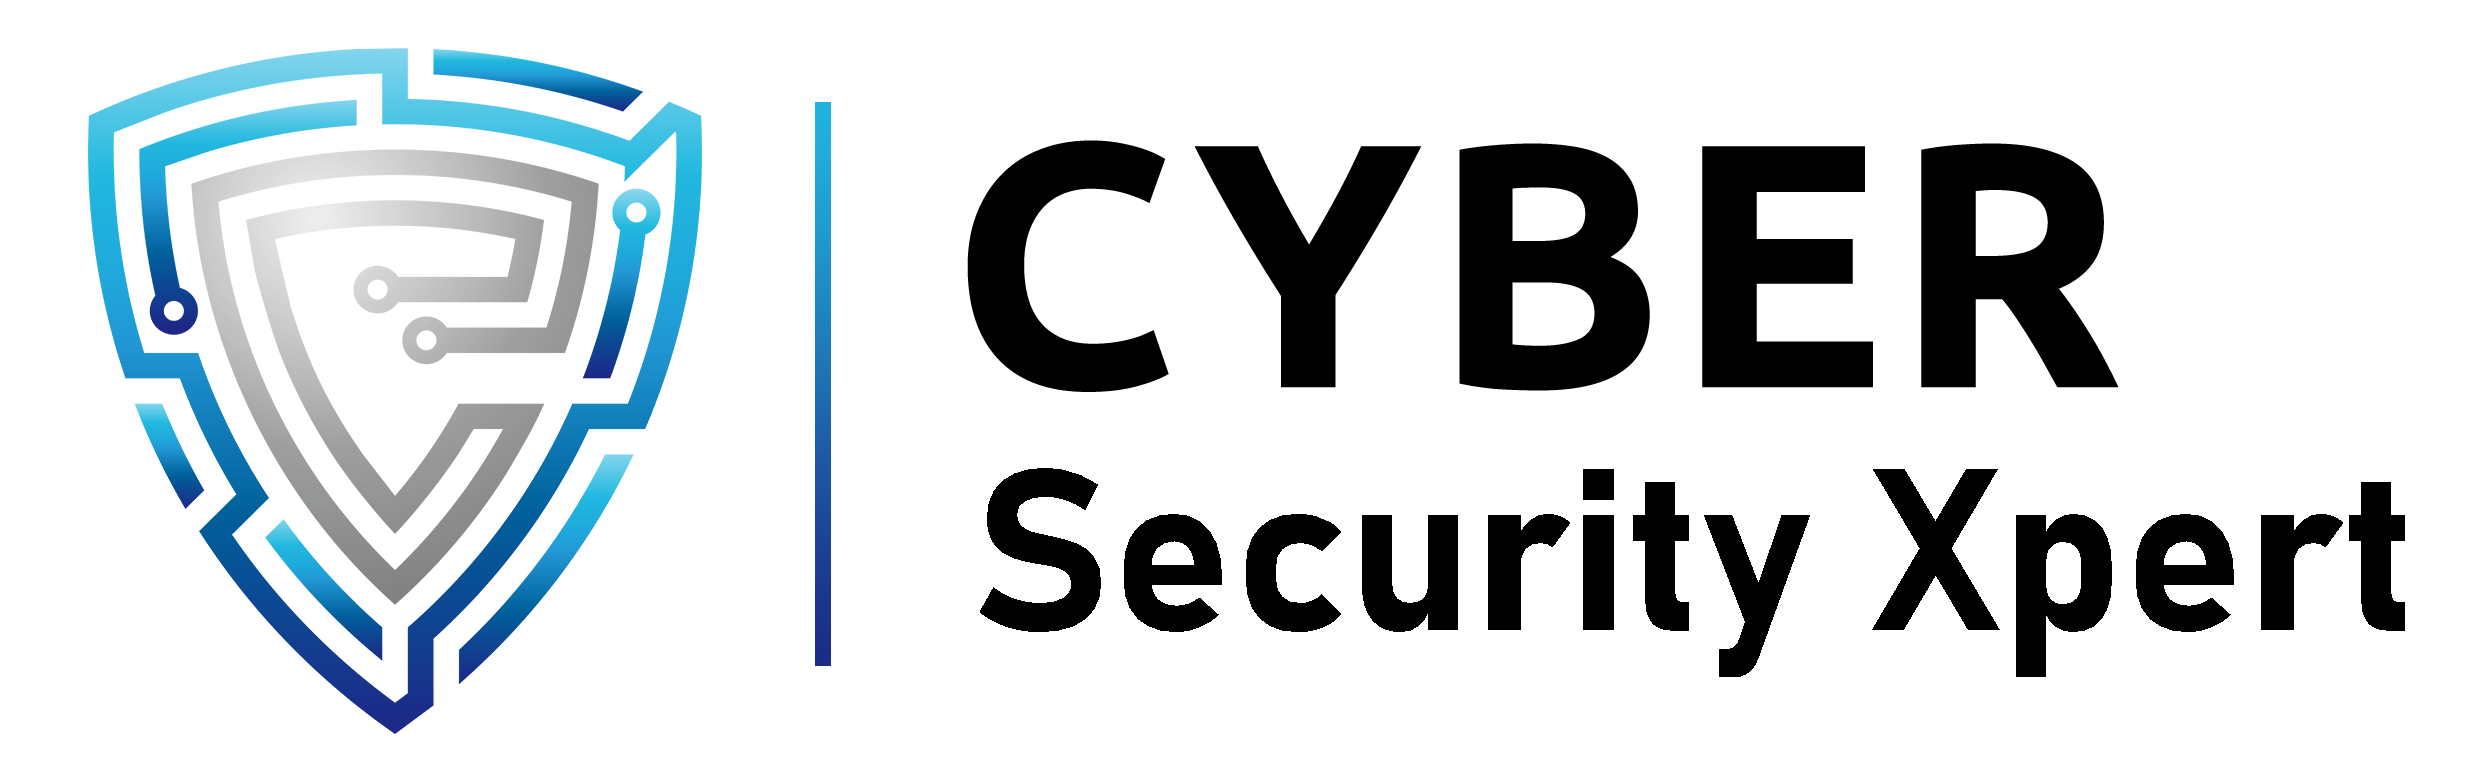 Cyber Security Xpert